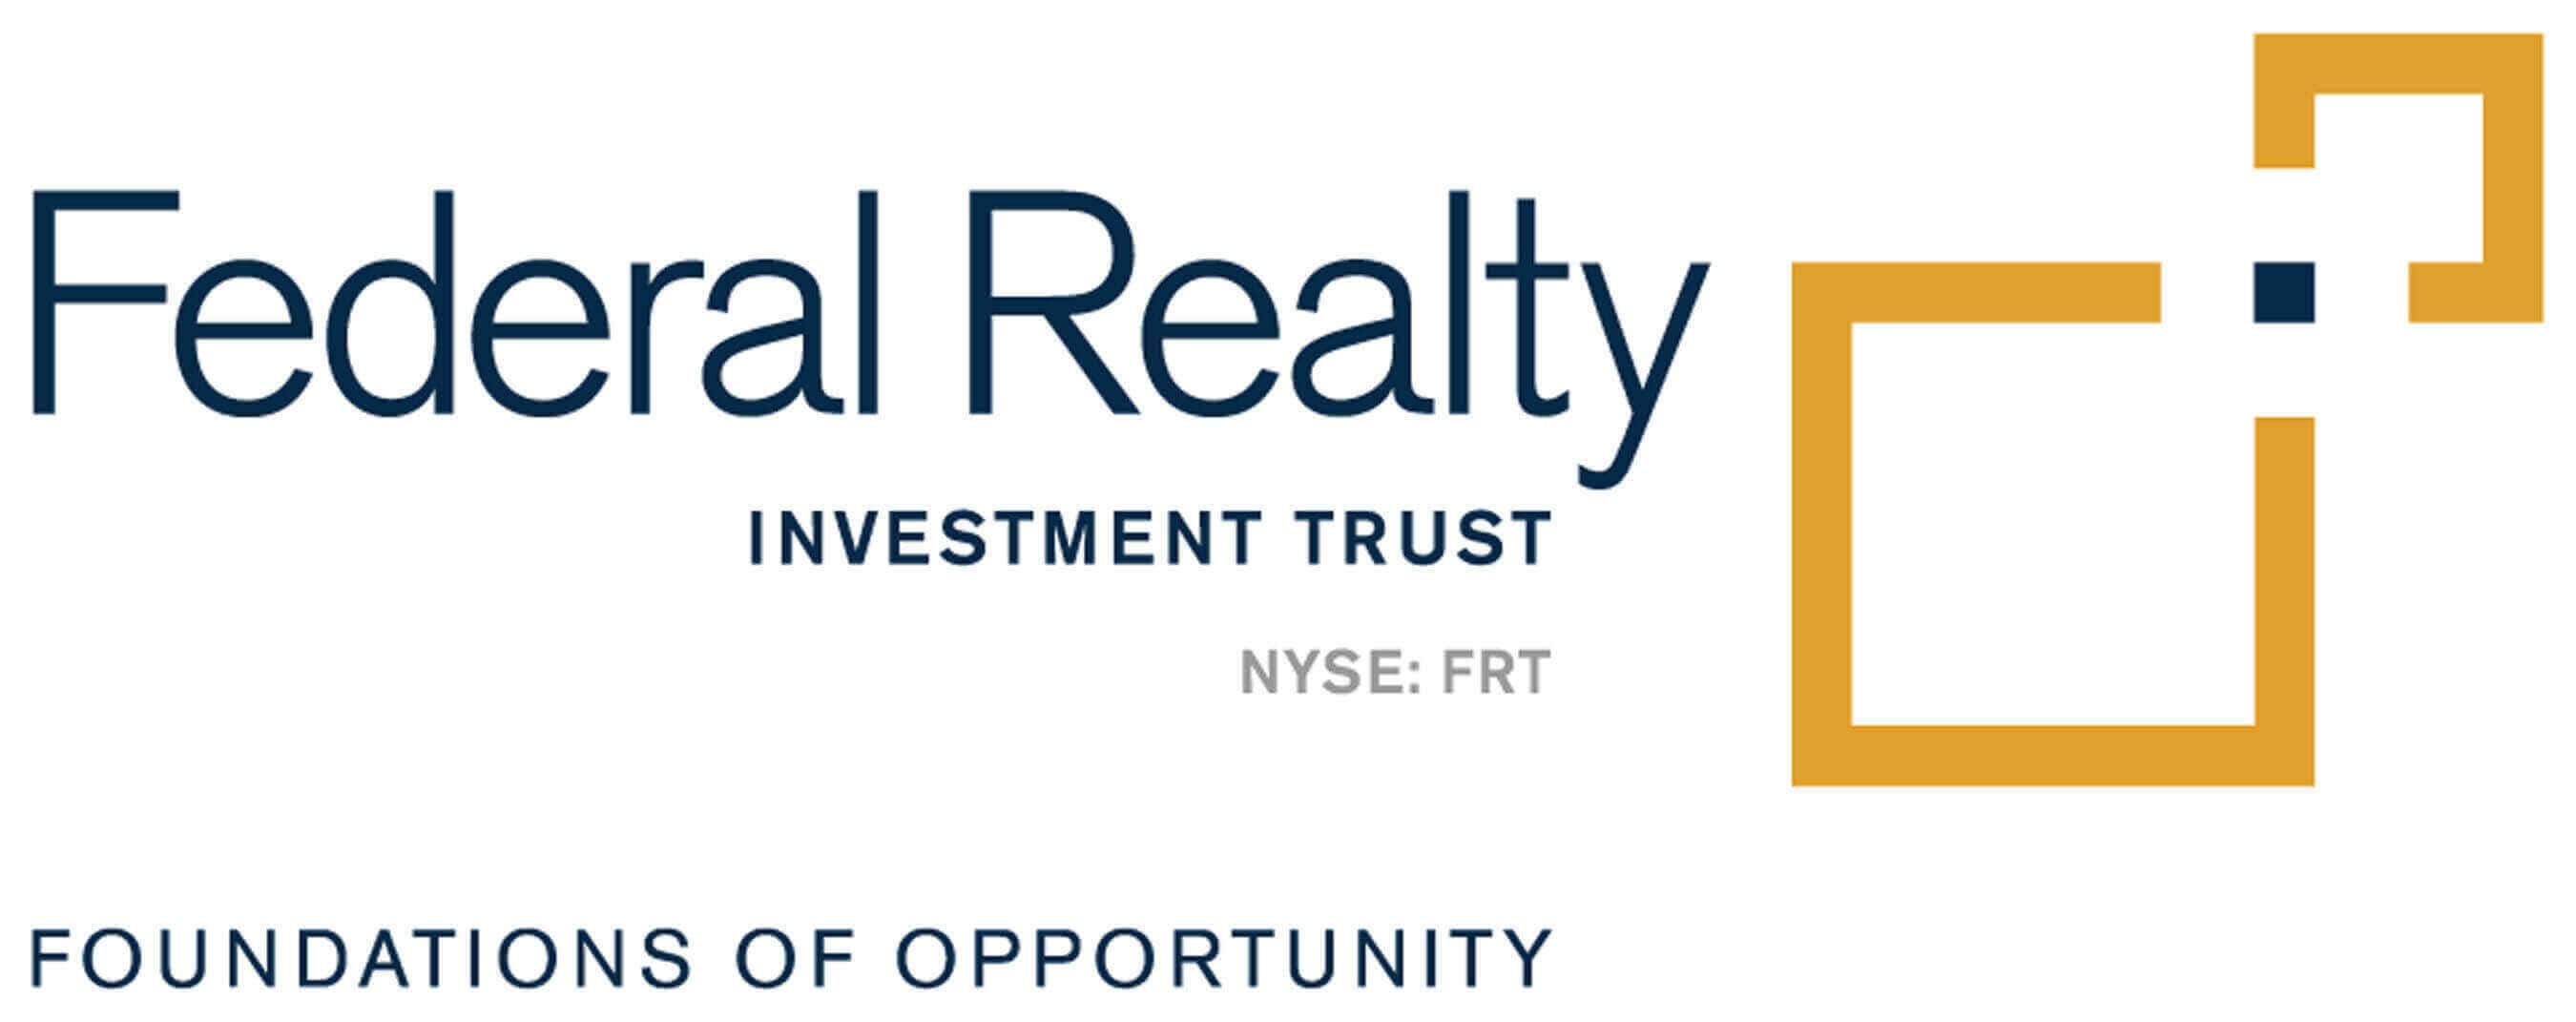 Federal Realty Investment Trust